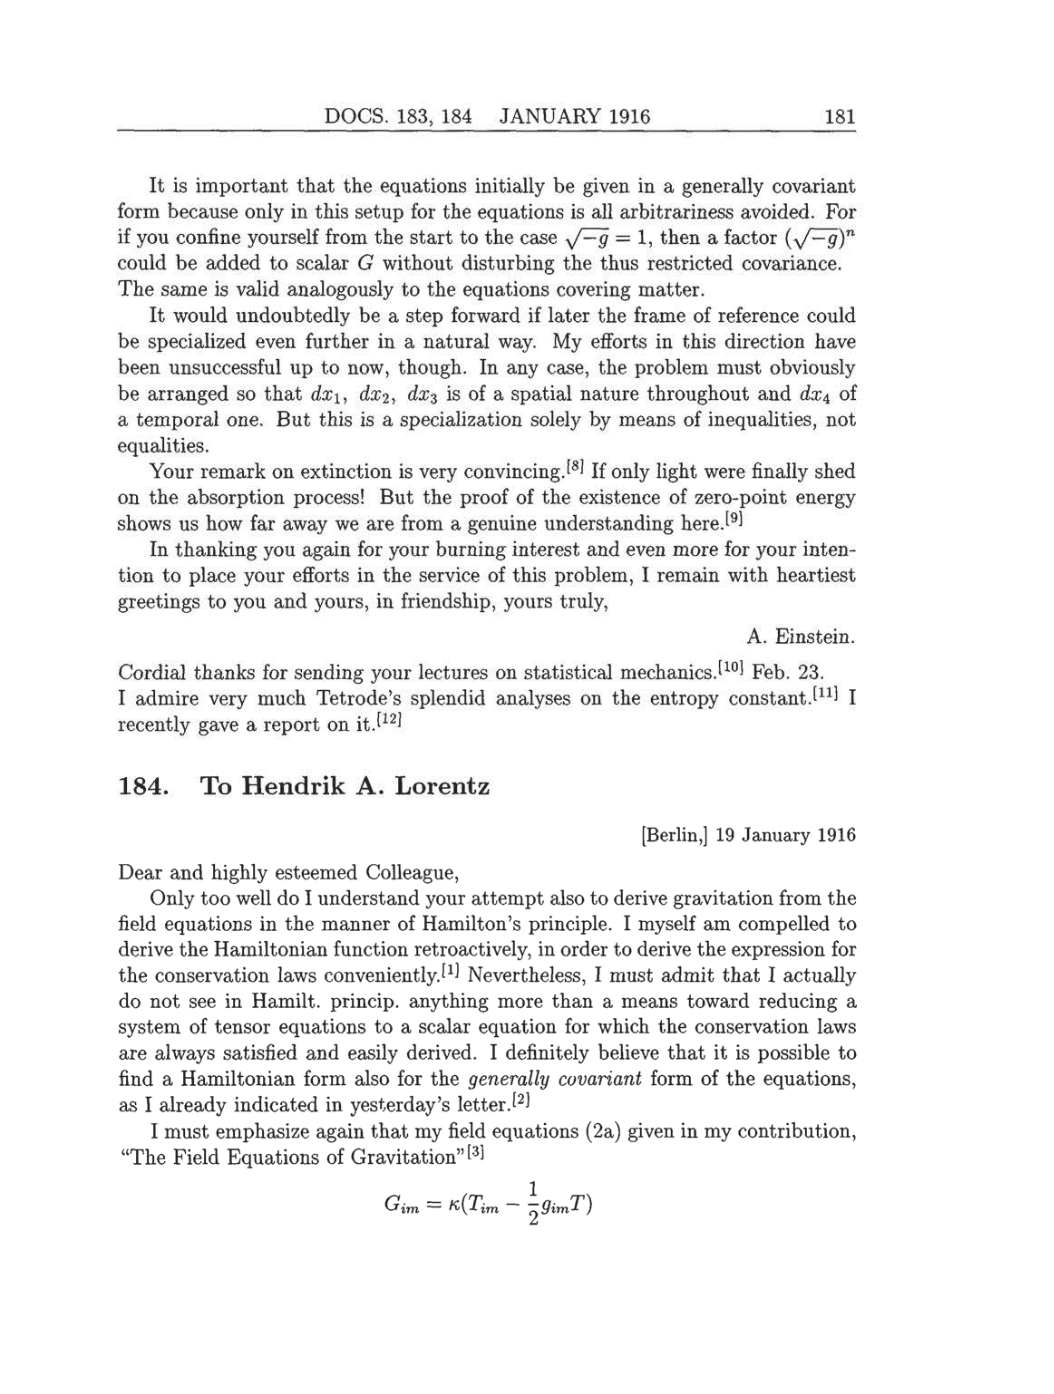 Volume 8: The Berlin Years: Correspondence, 1914-1918 (English translation supplement) page 181